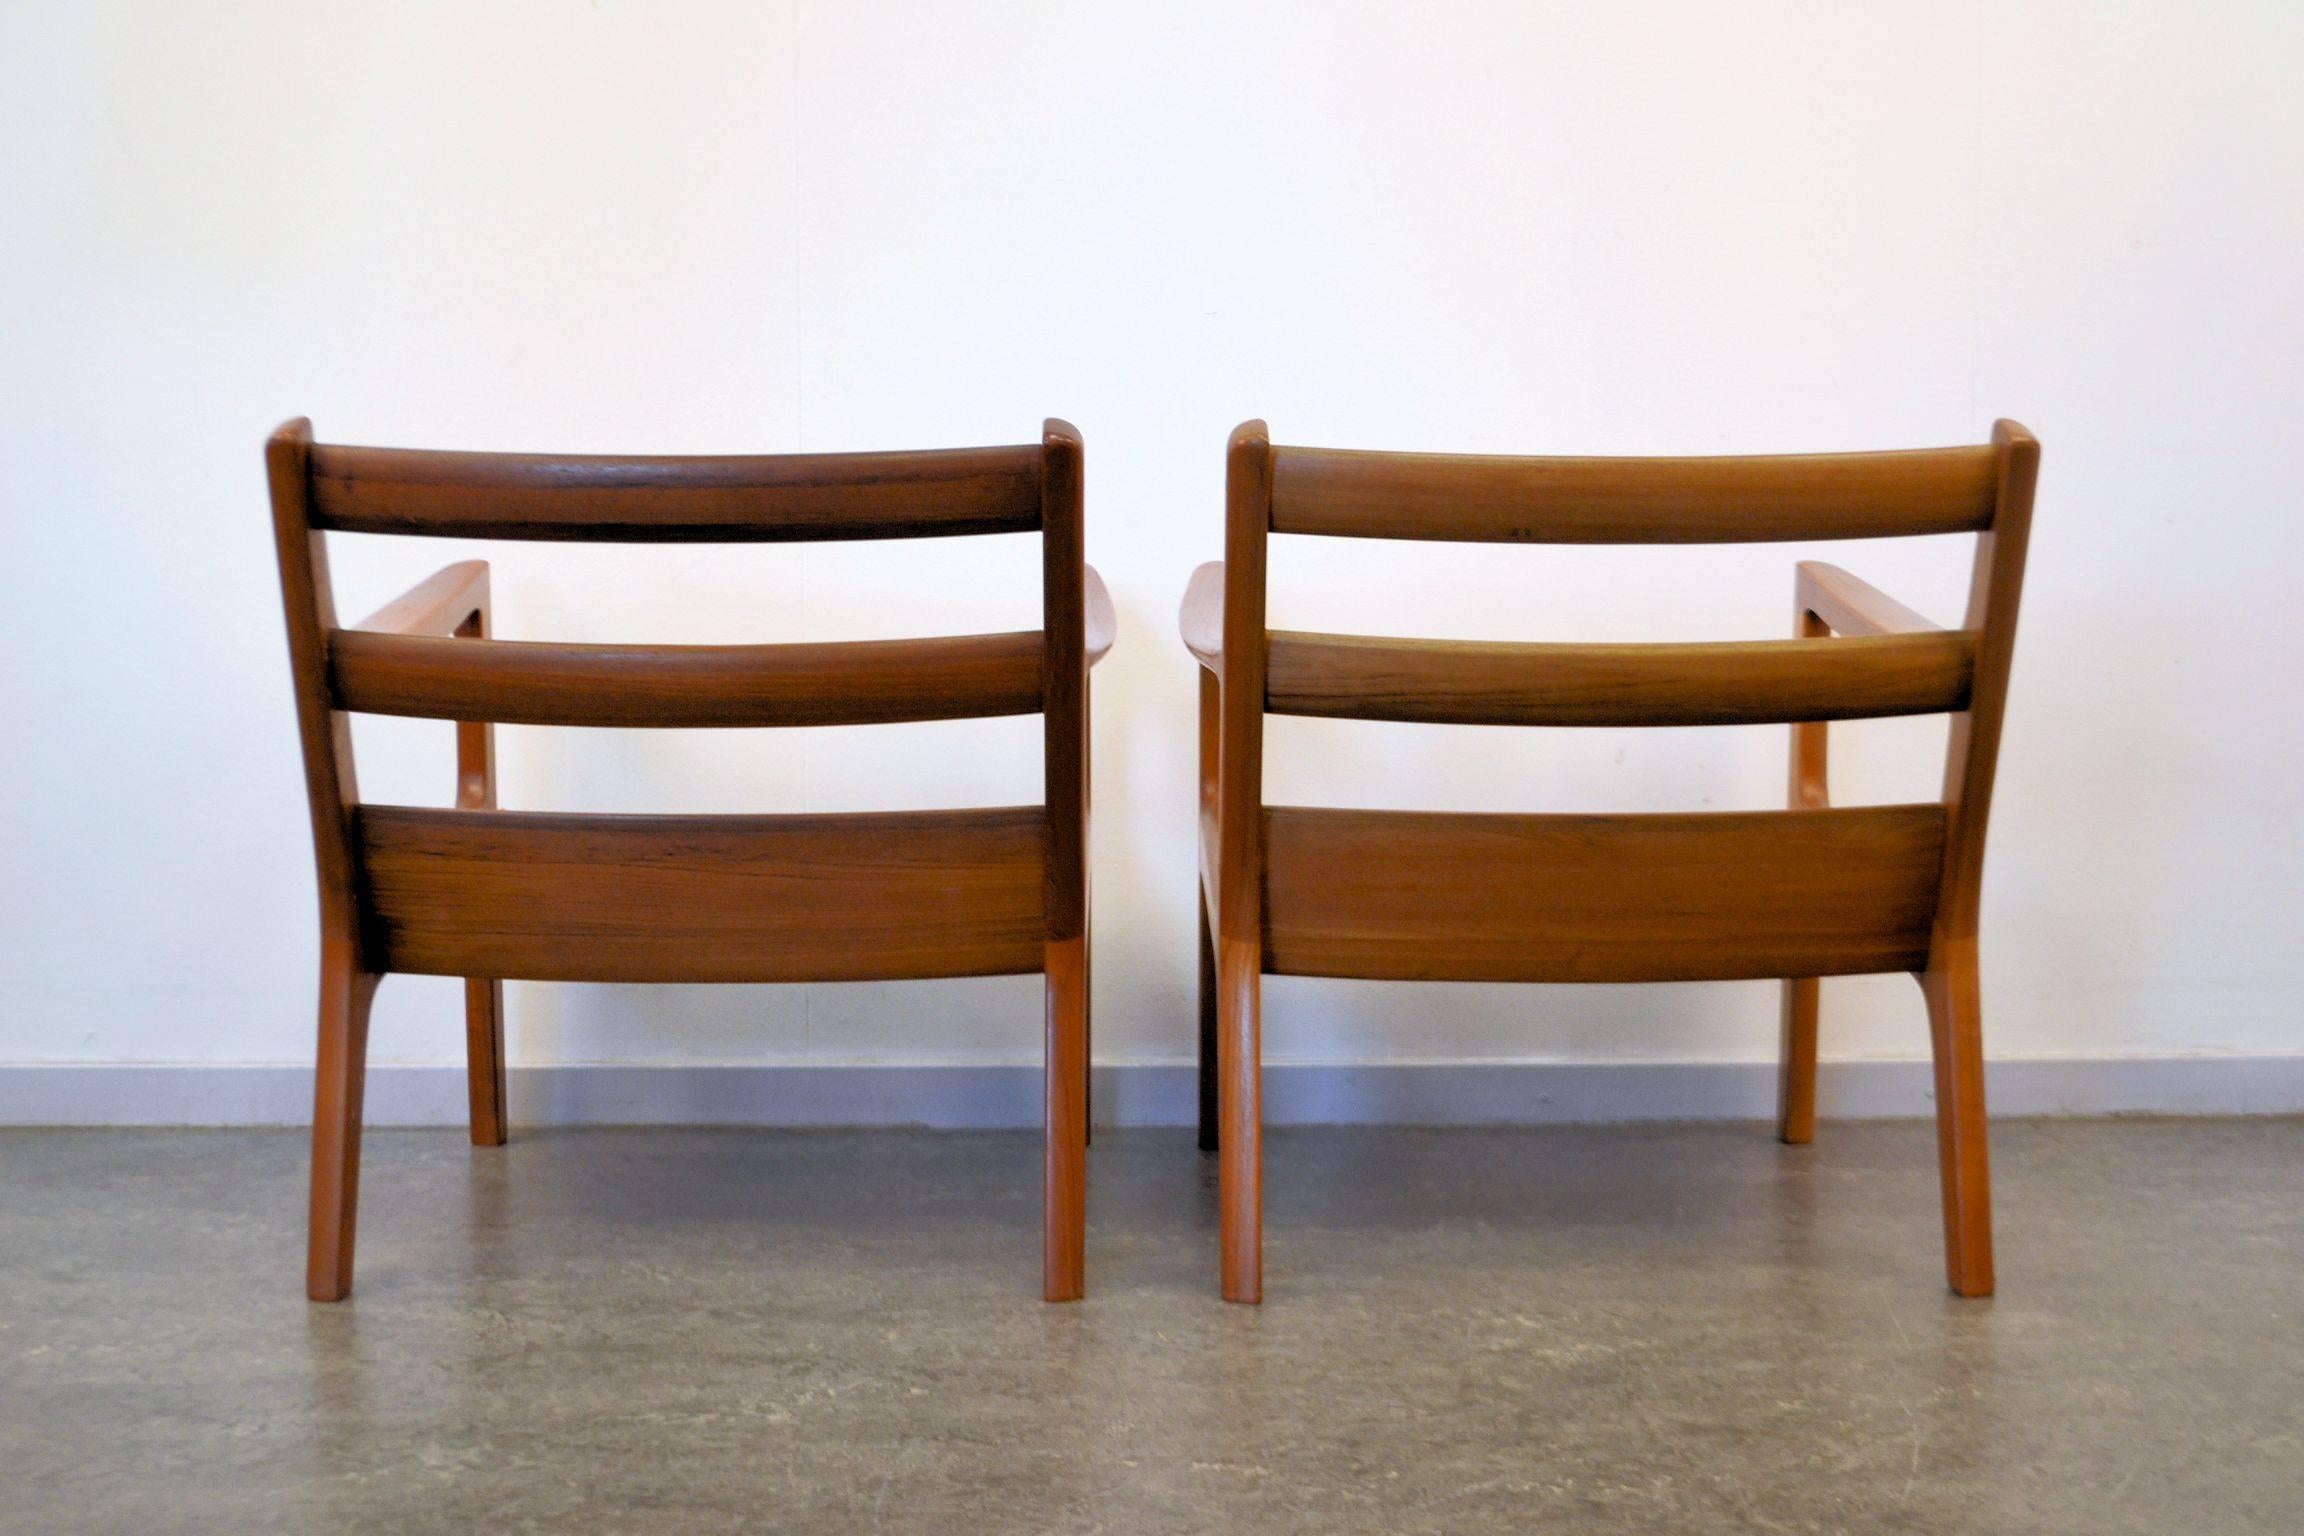 Ole Wanscher Senator Teak Chairs, Set of Two For Sale 1